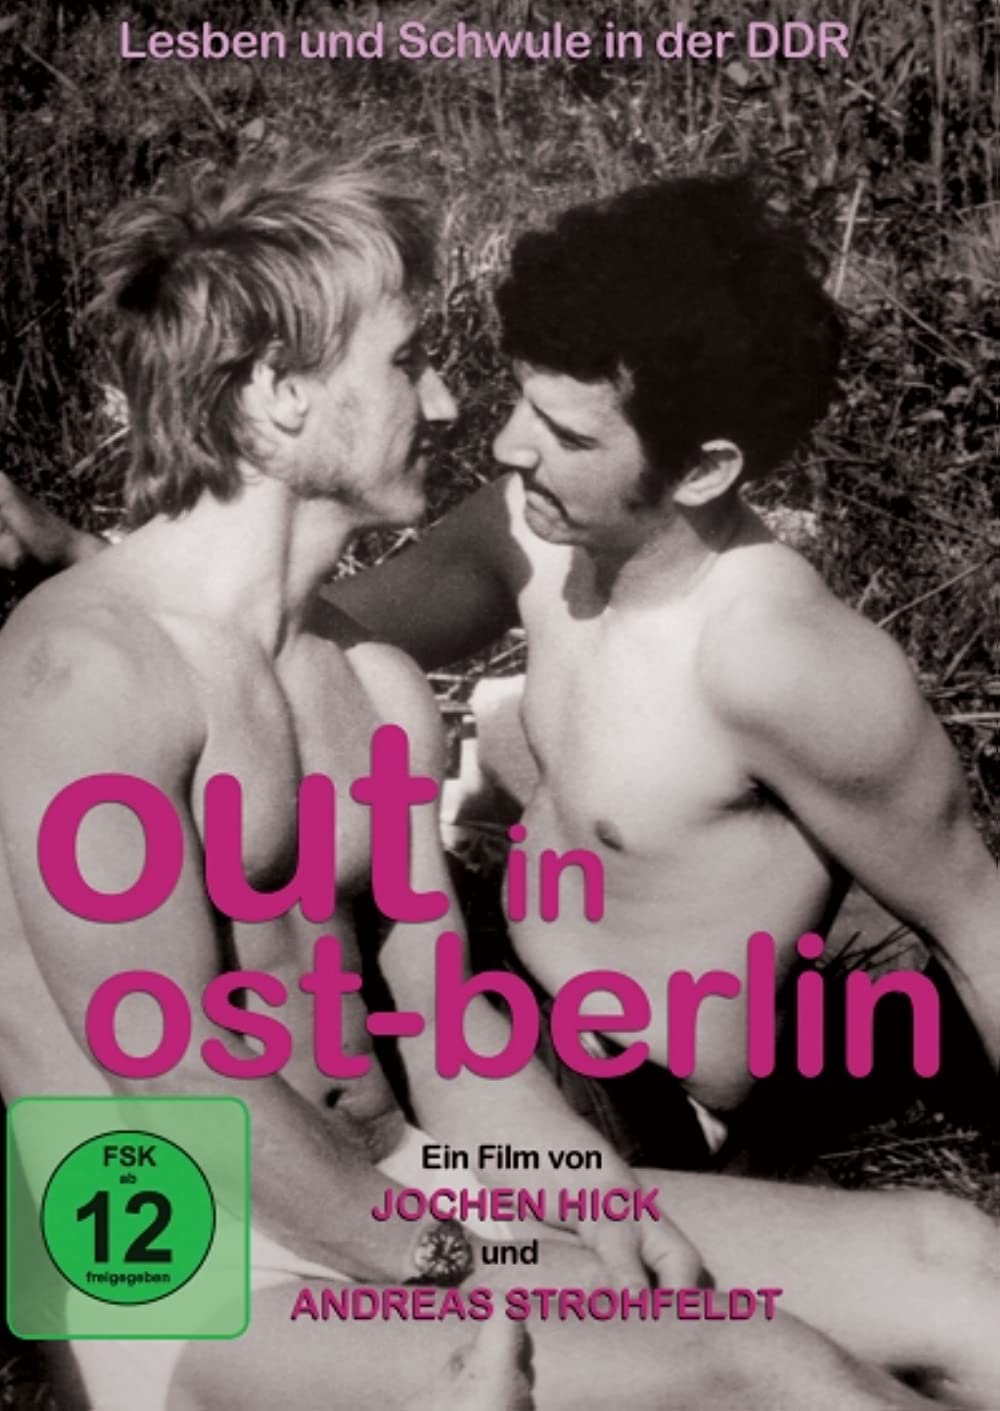 Out in Ost-Berlin